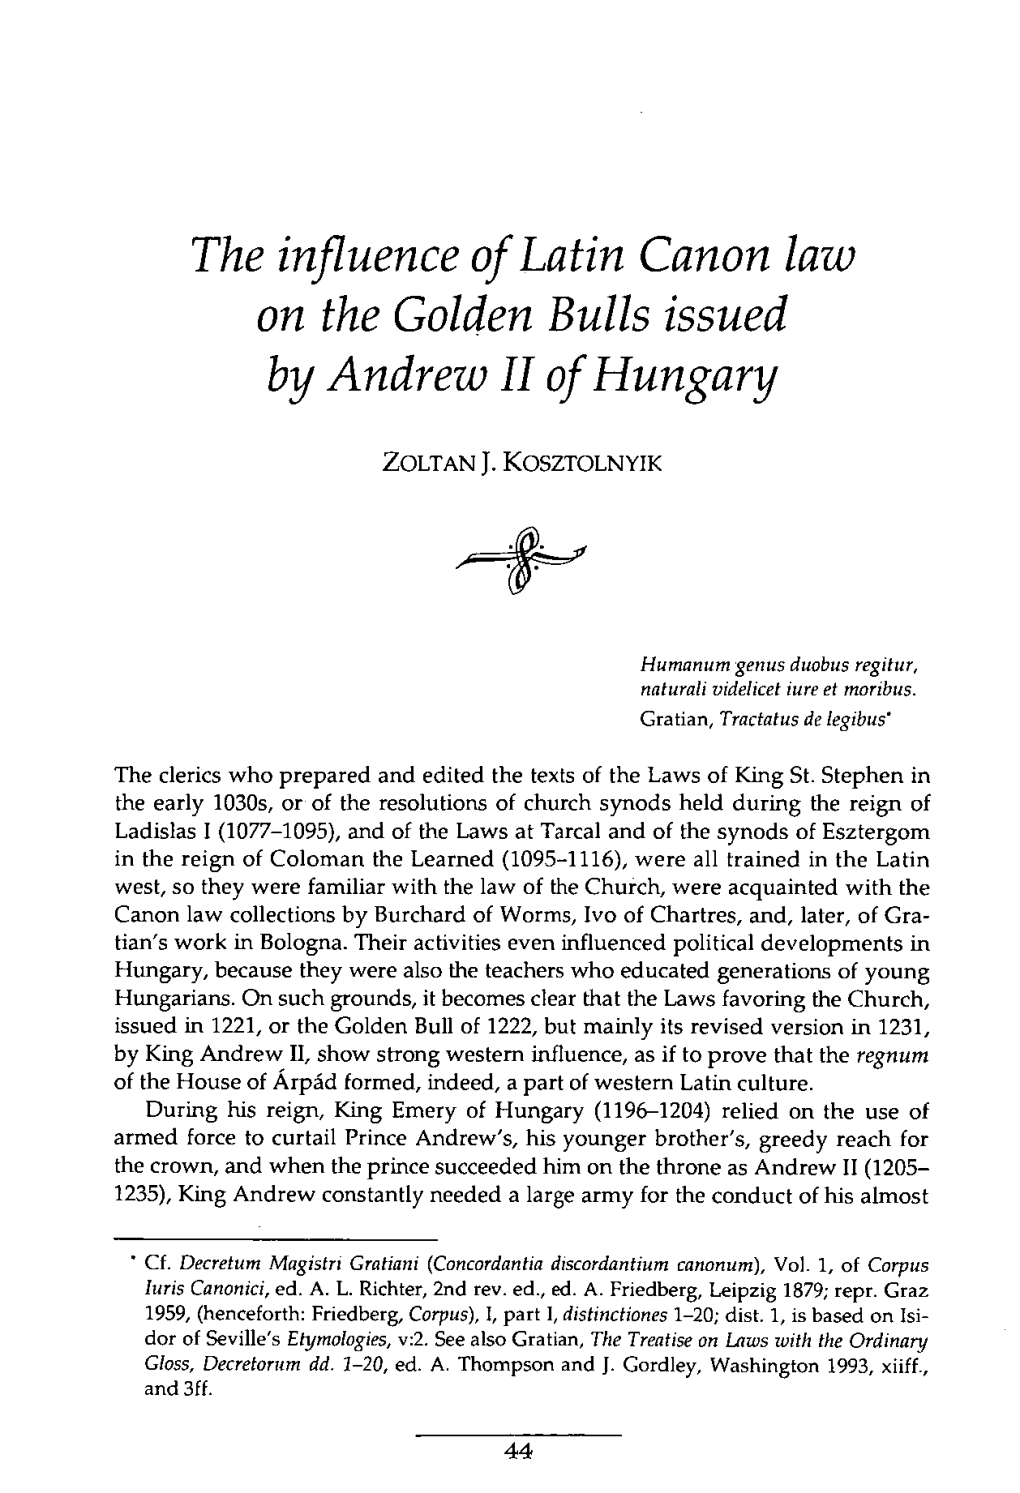 The Influence of Latin Canon Law on the Golden Bulls Issued by Andrew II of Hungary